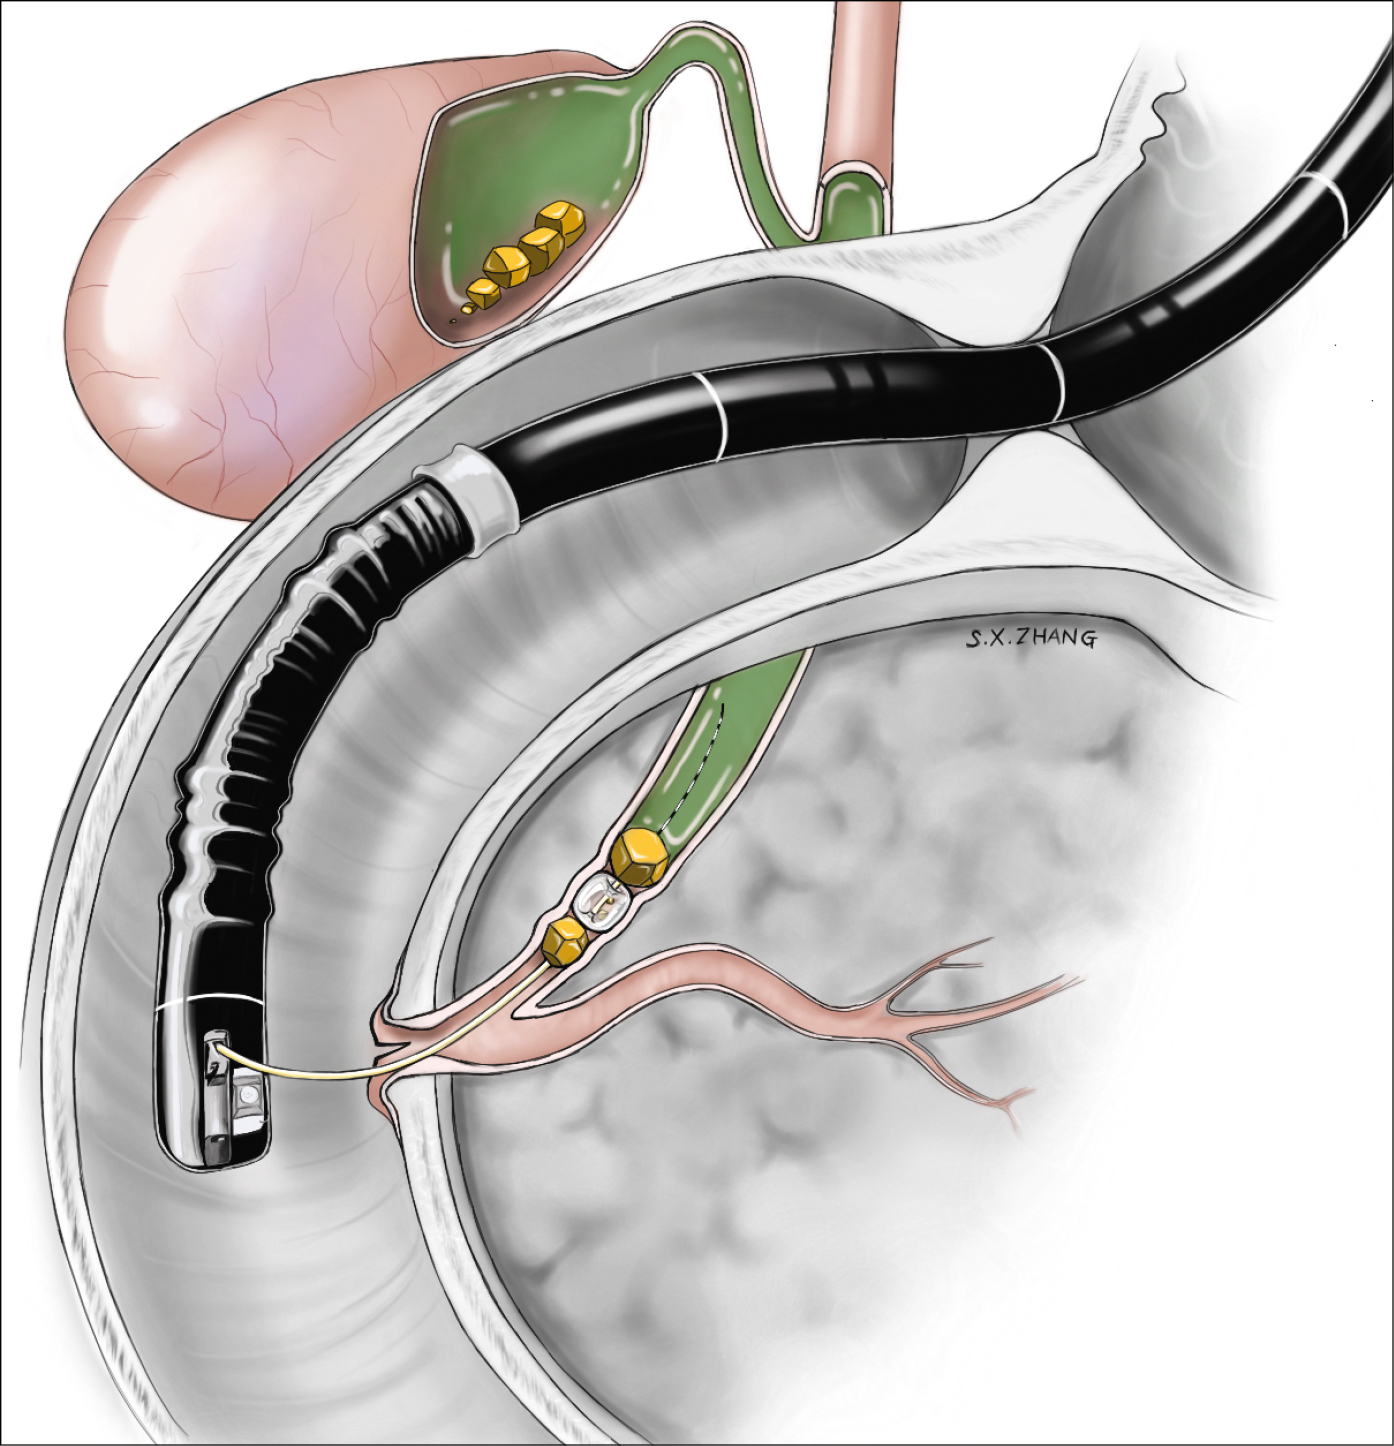 Figure 031_0351.  Endoscopic retrograde cholangiopancreatography (ERCP) with stone extraction.  Illustration courtesy of Dr Shannon Zhang.  